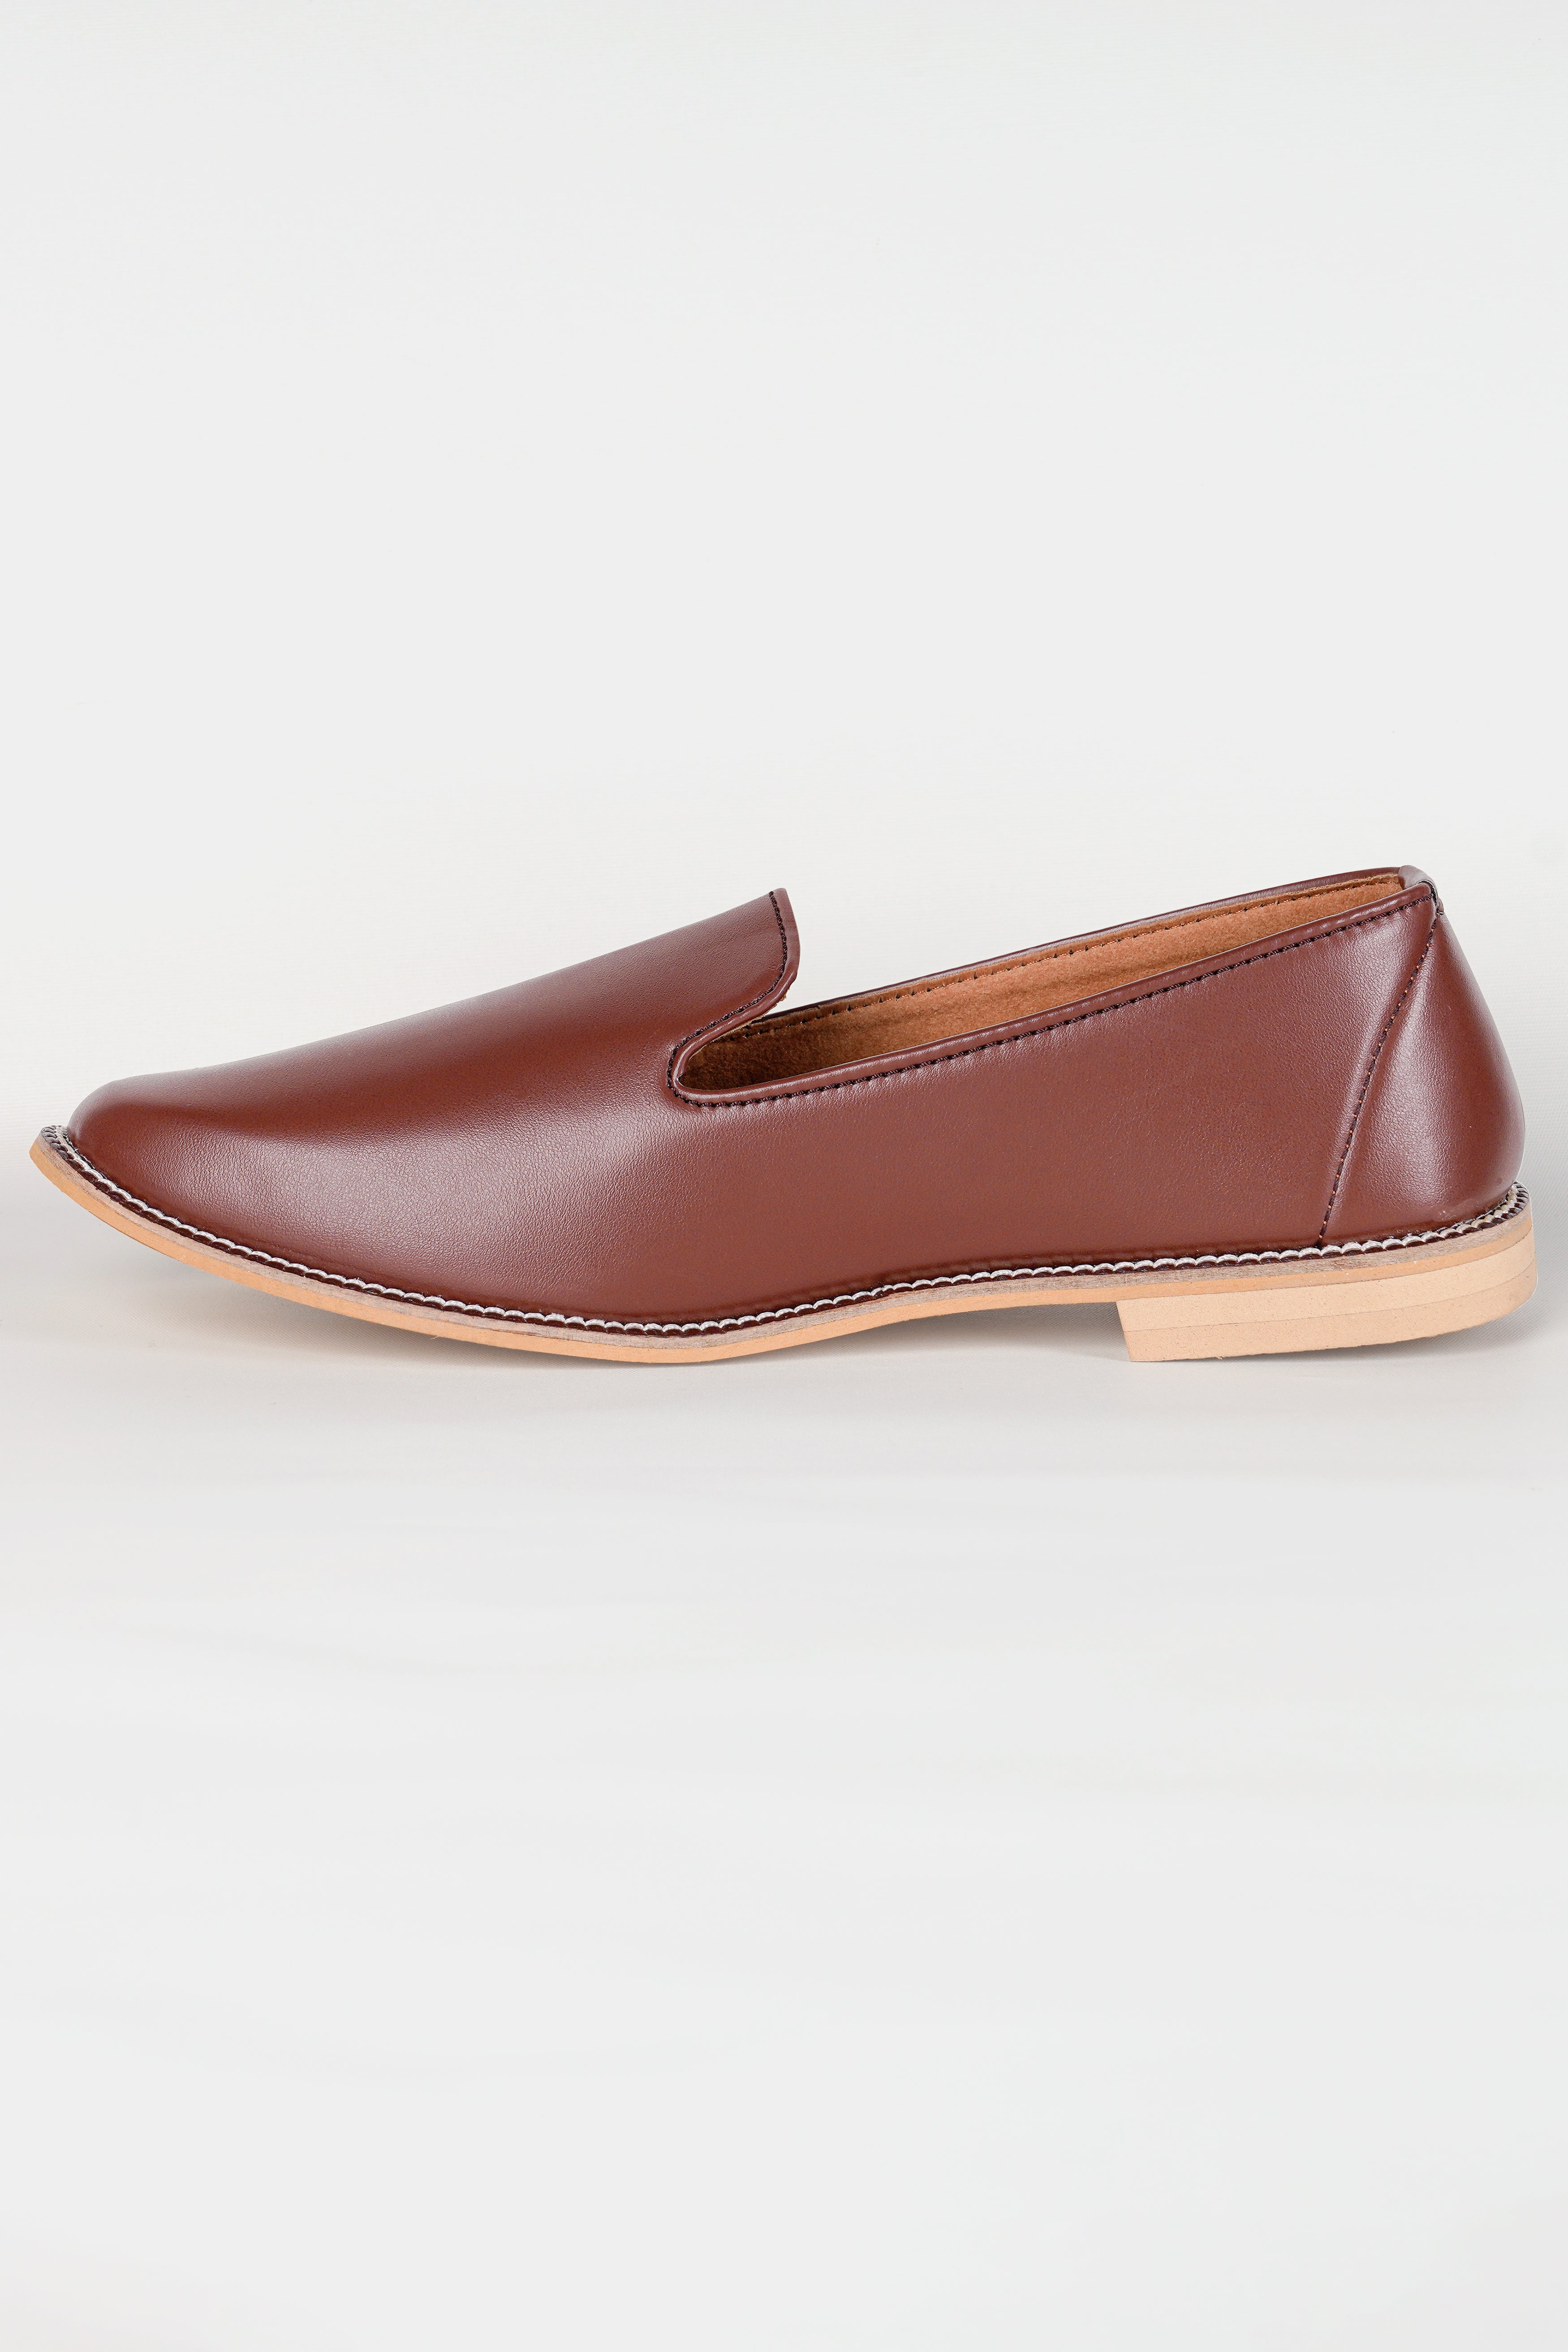 Brown Vegan Leather Hand Stitched Mojri Slip-On Shoes FT150-6, FT150-7, FT150-8, FT150-9, FT150-10, FT150-11